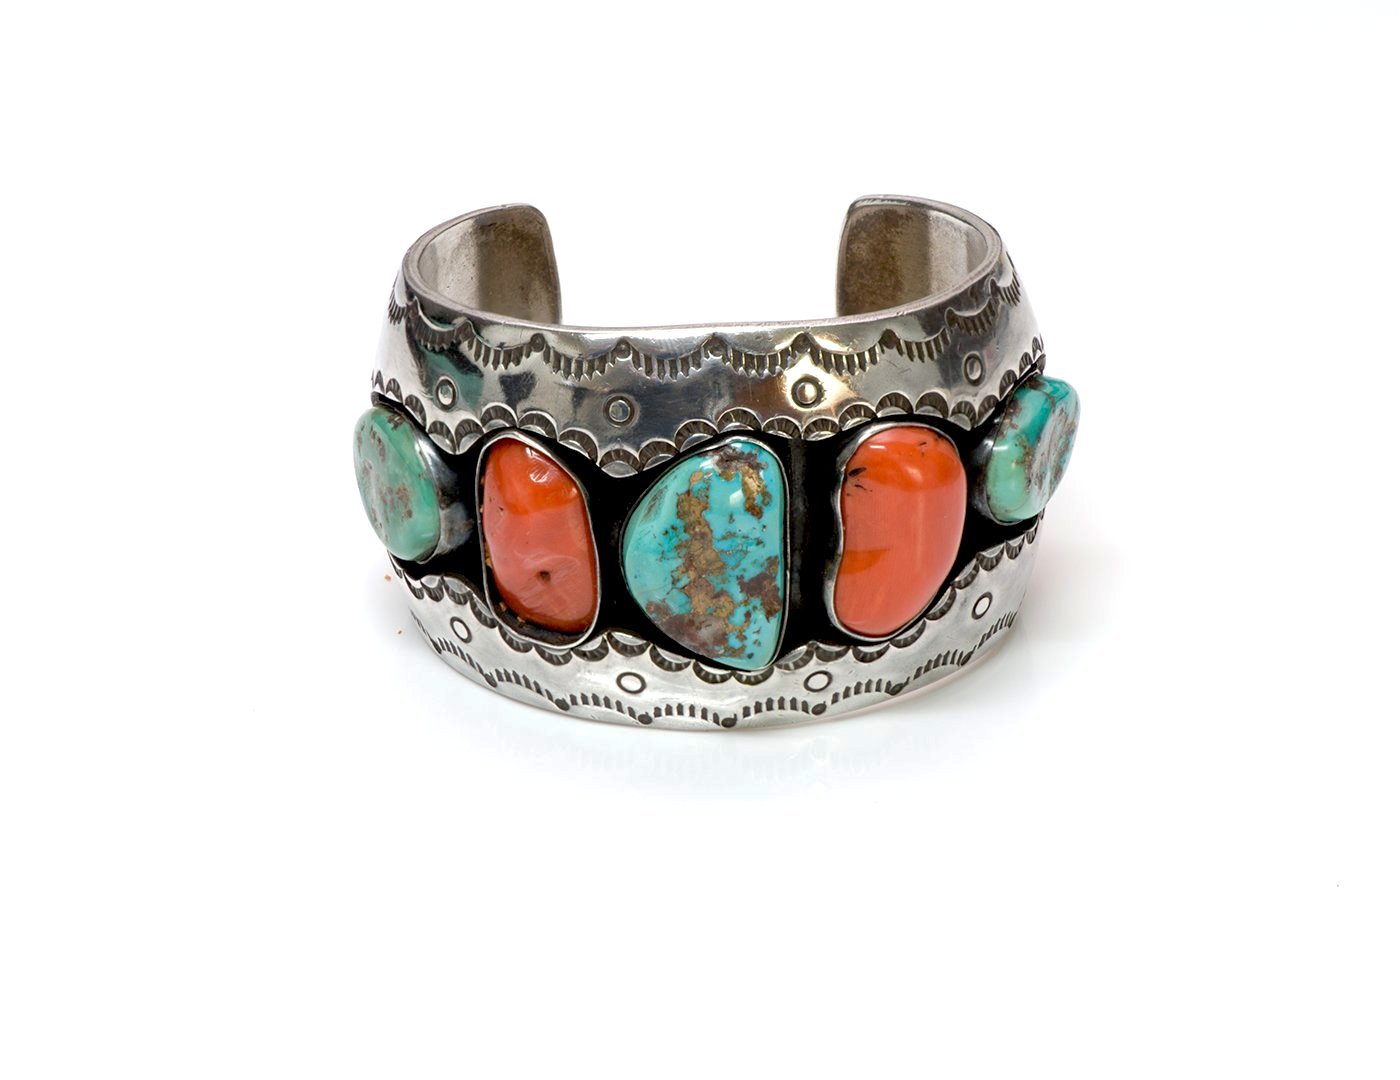 Roger Lewis American Indian Navajo Silver Coral Turquoise Cuff Bracelet